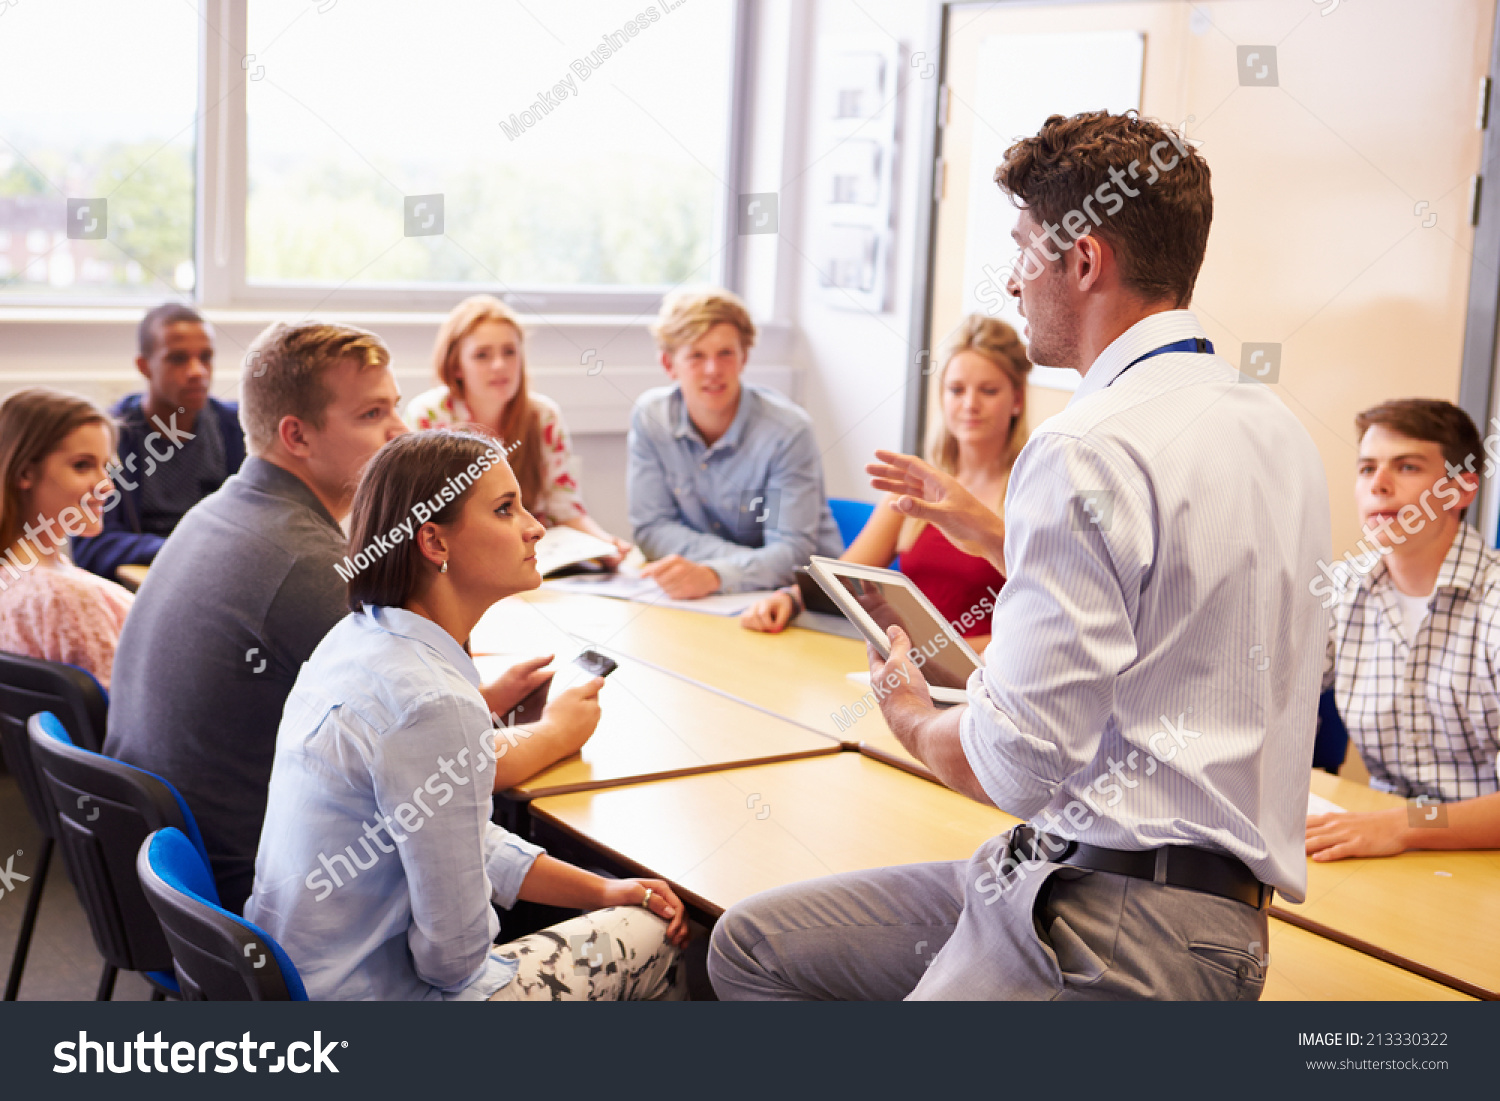 Teacher With College Students Giving Lesson In Classroom #213330322